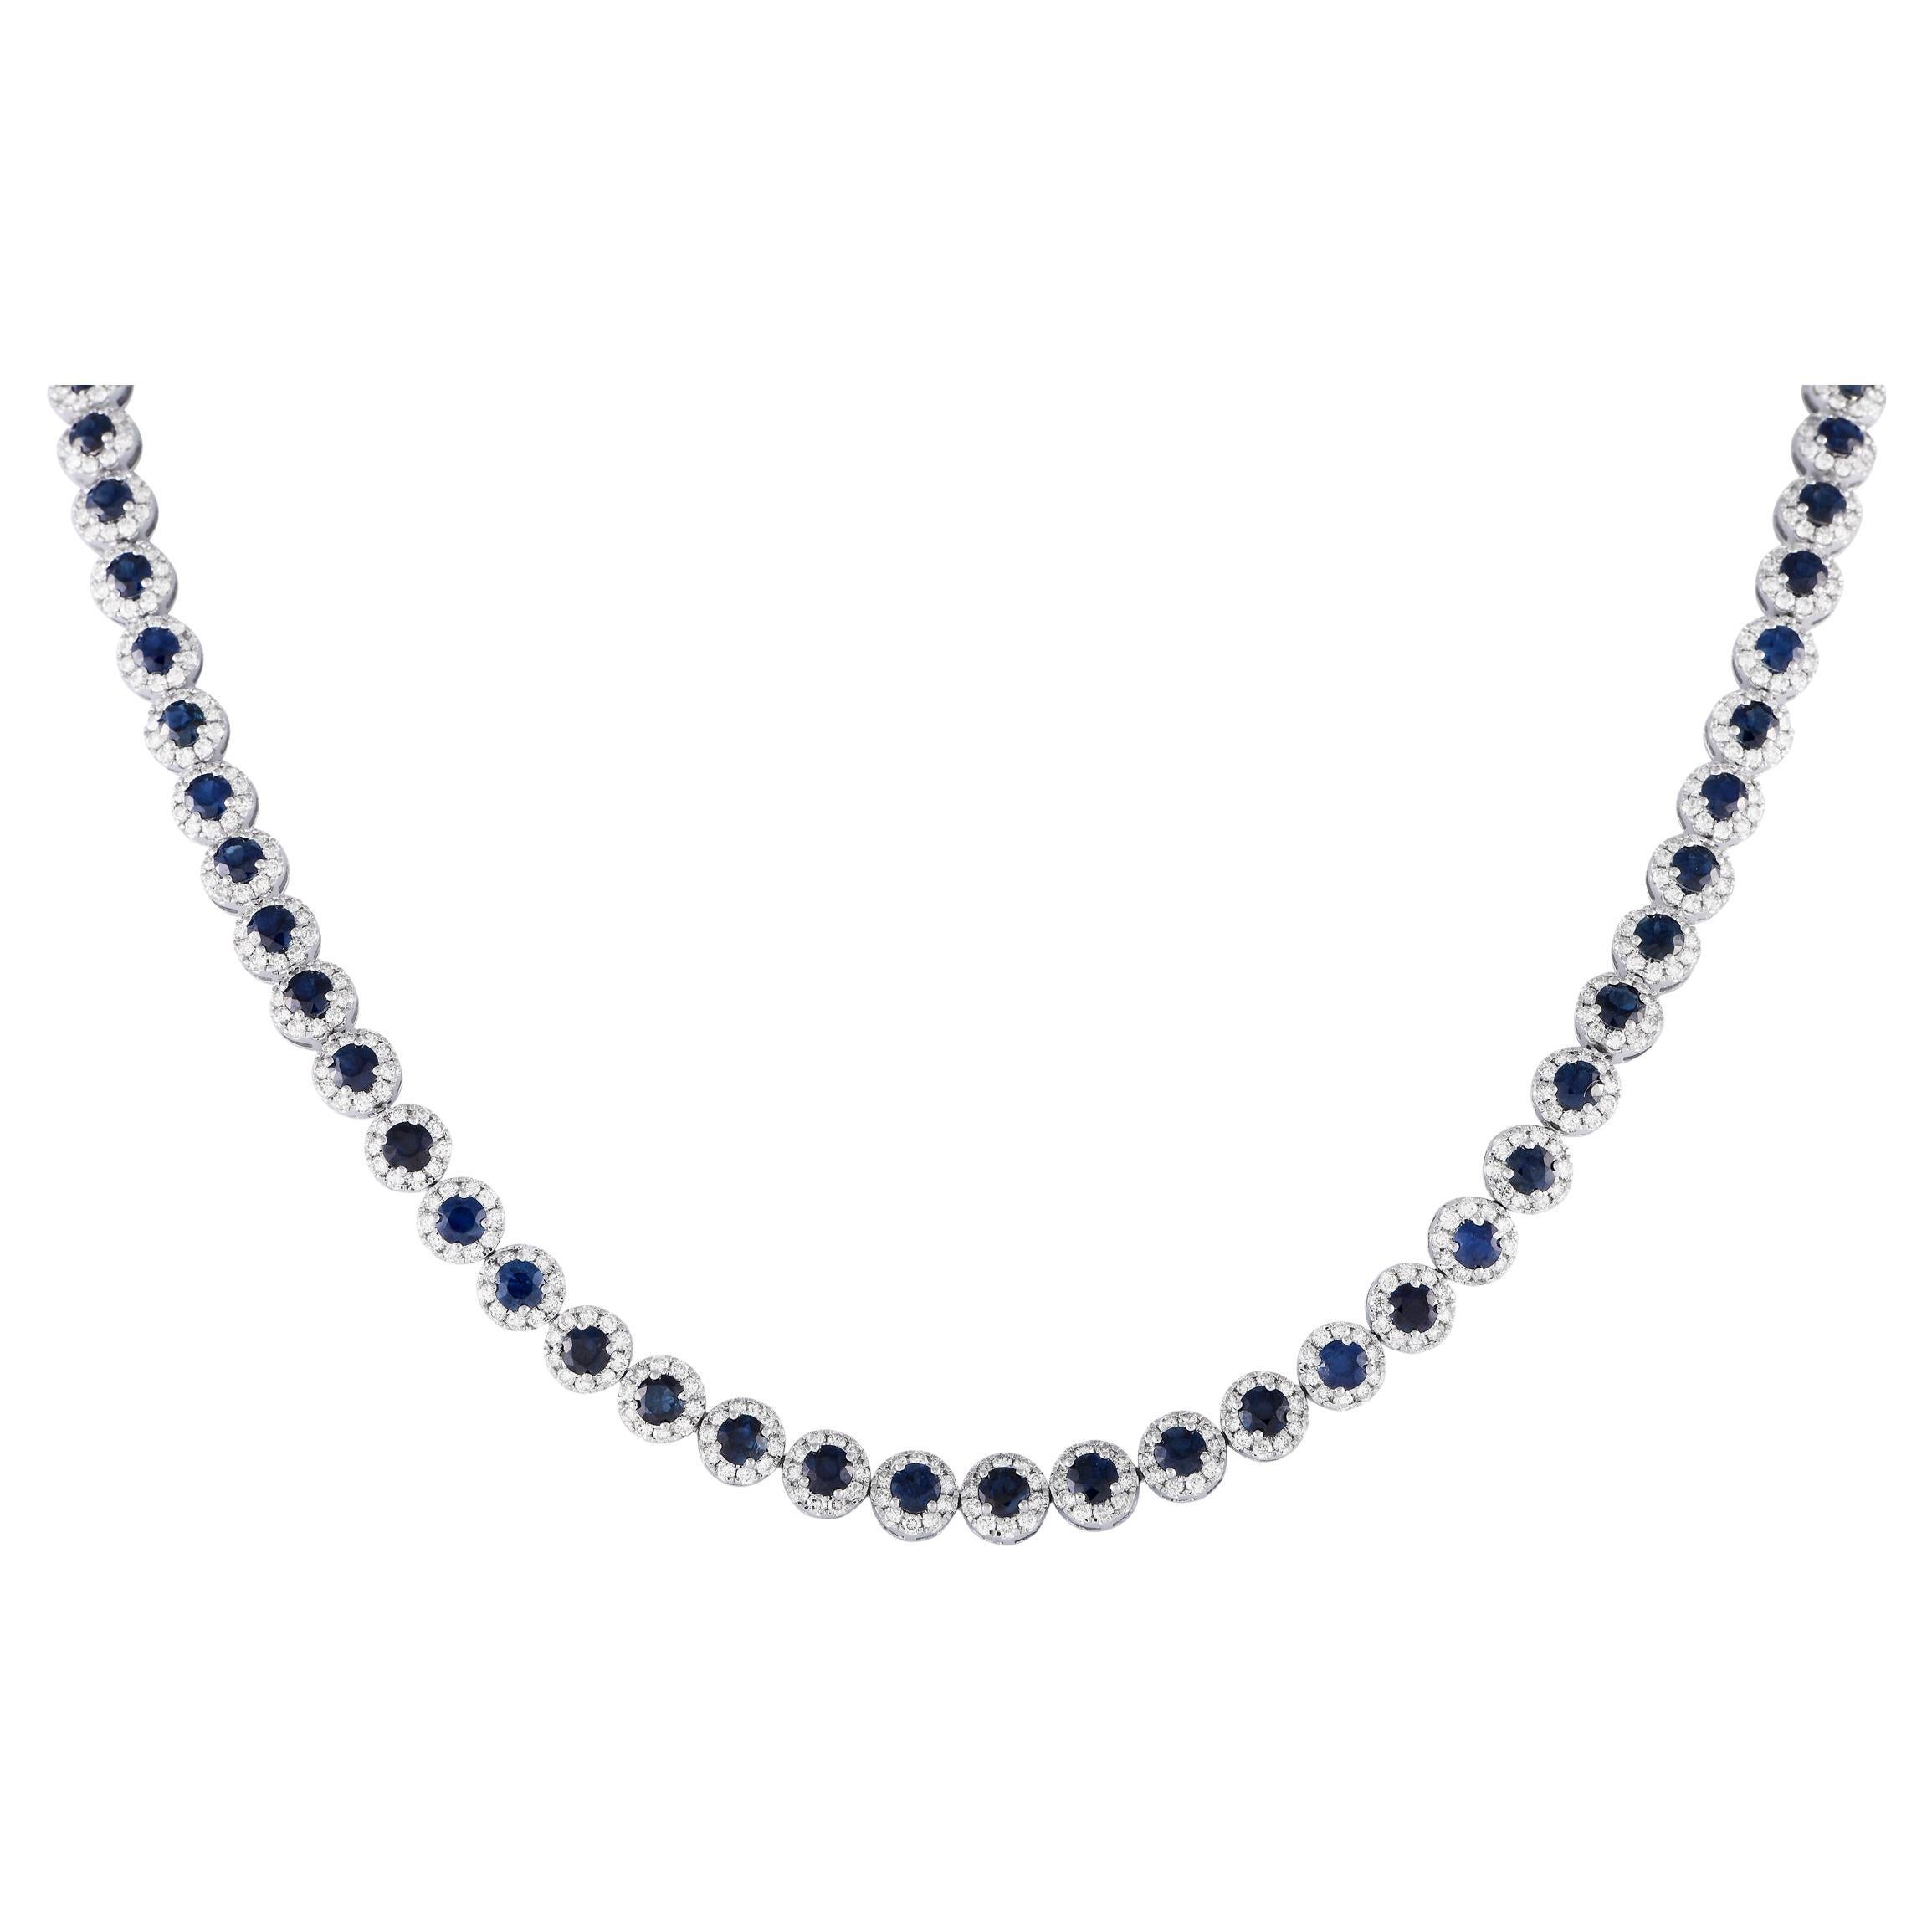 LB Exclusive 14k White Gold 8.15 Carat Diamond and Sapphire Necklace